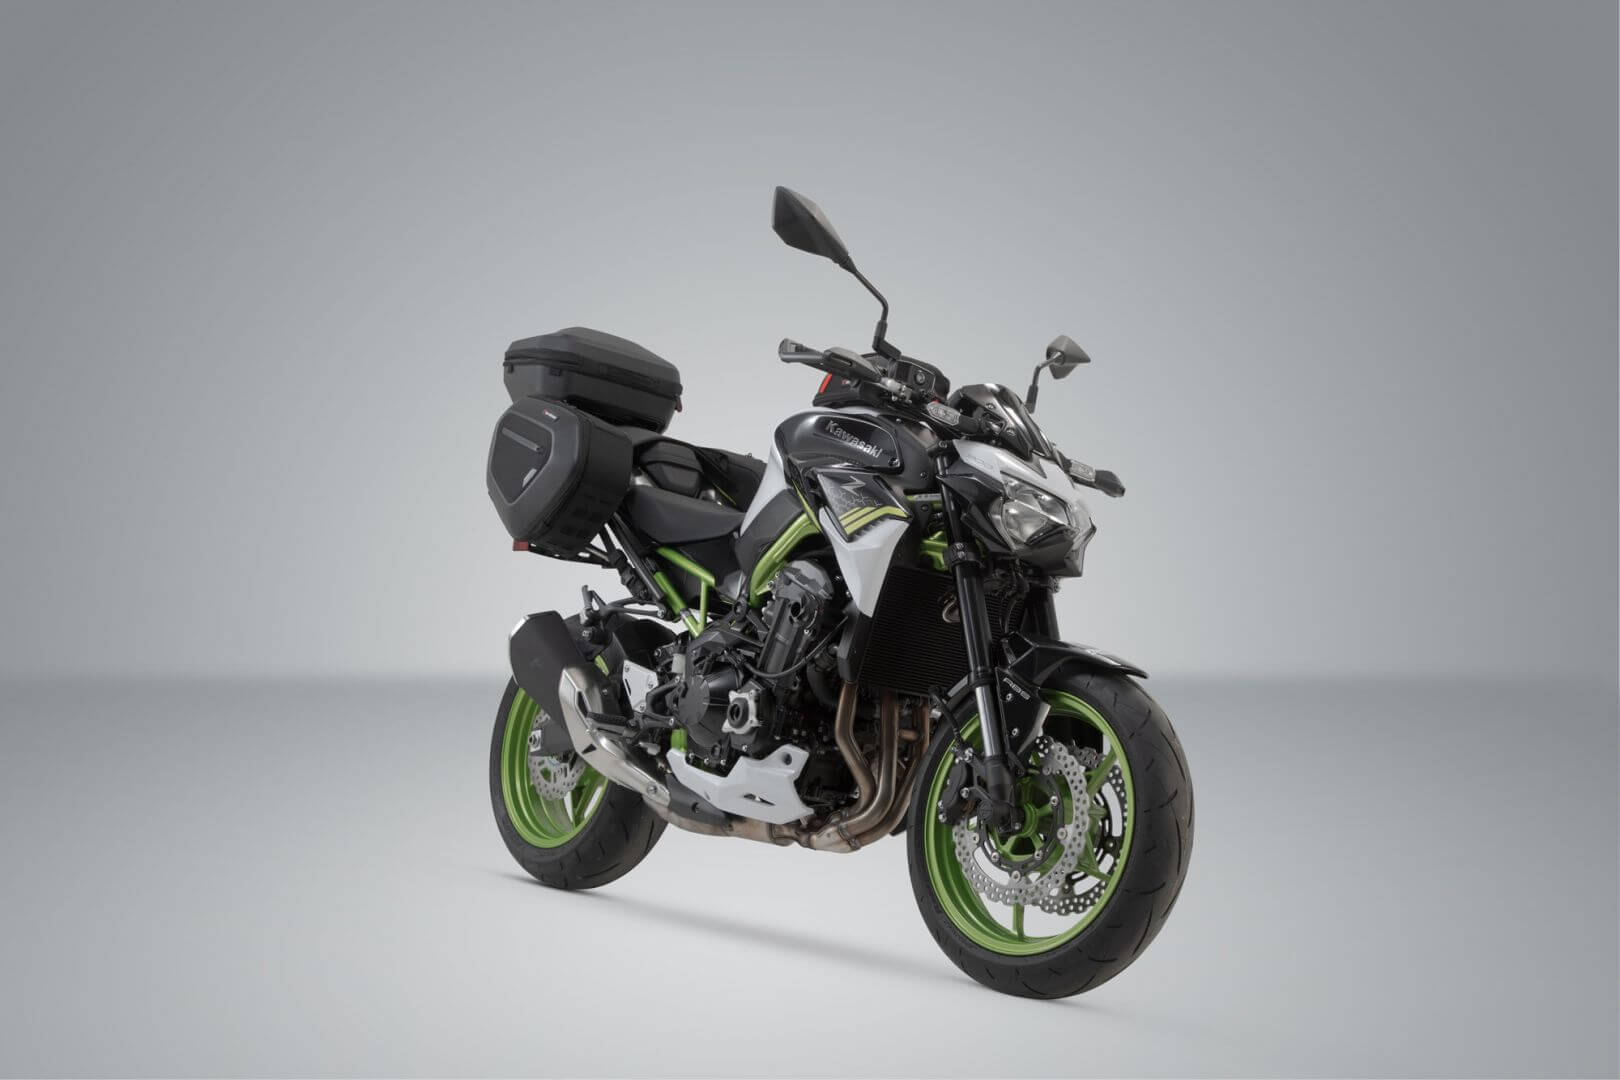 Accessories from SW-MOTECH for the Kawasaki Z 900 - SW-MOTECH